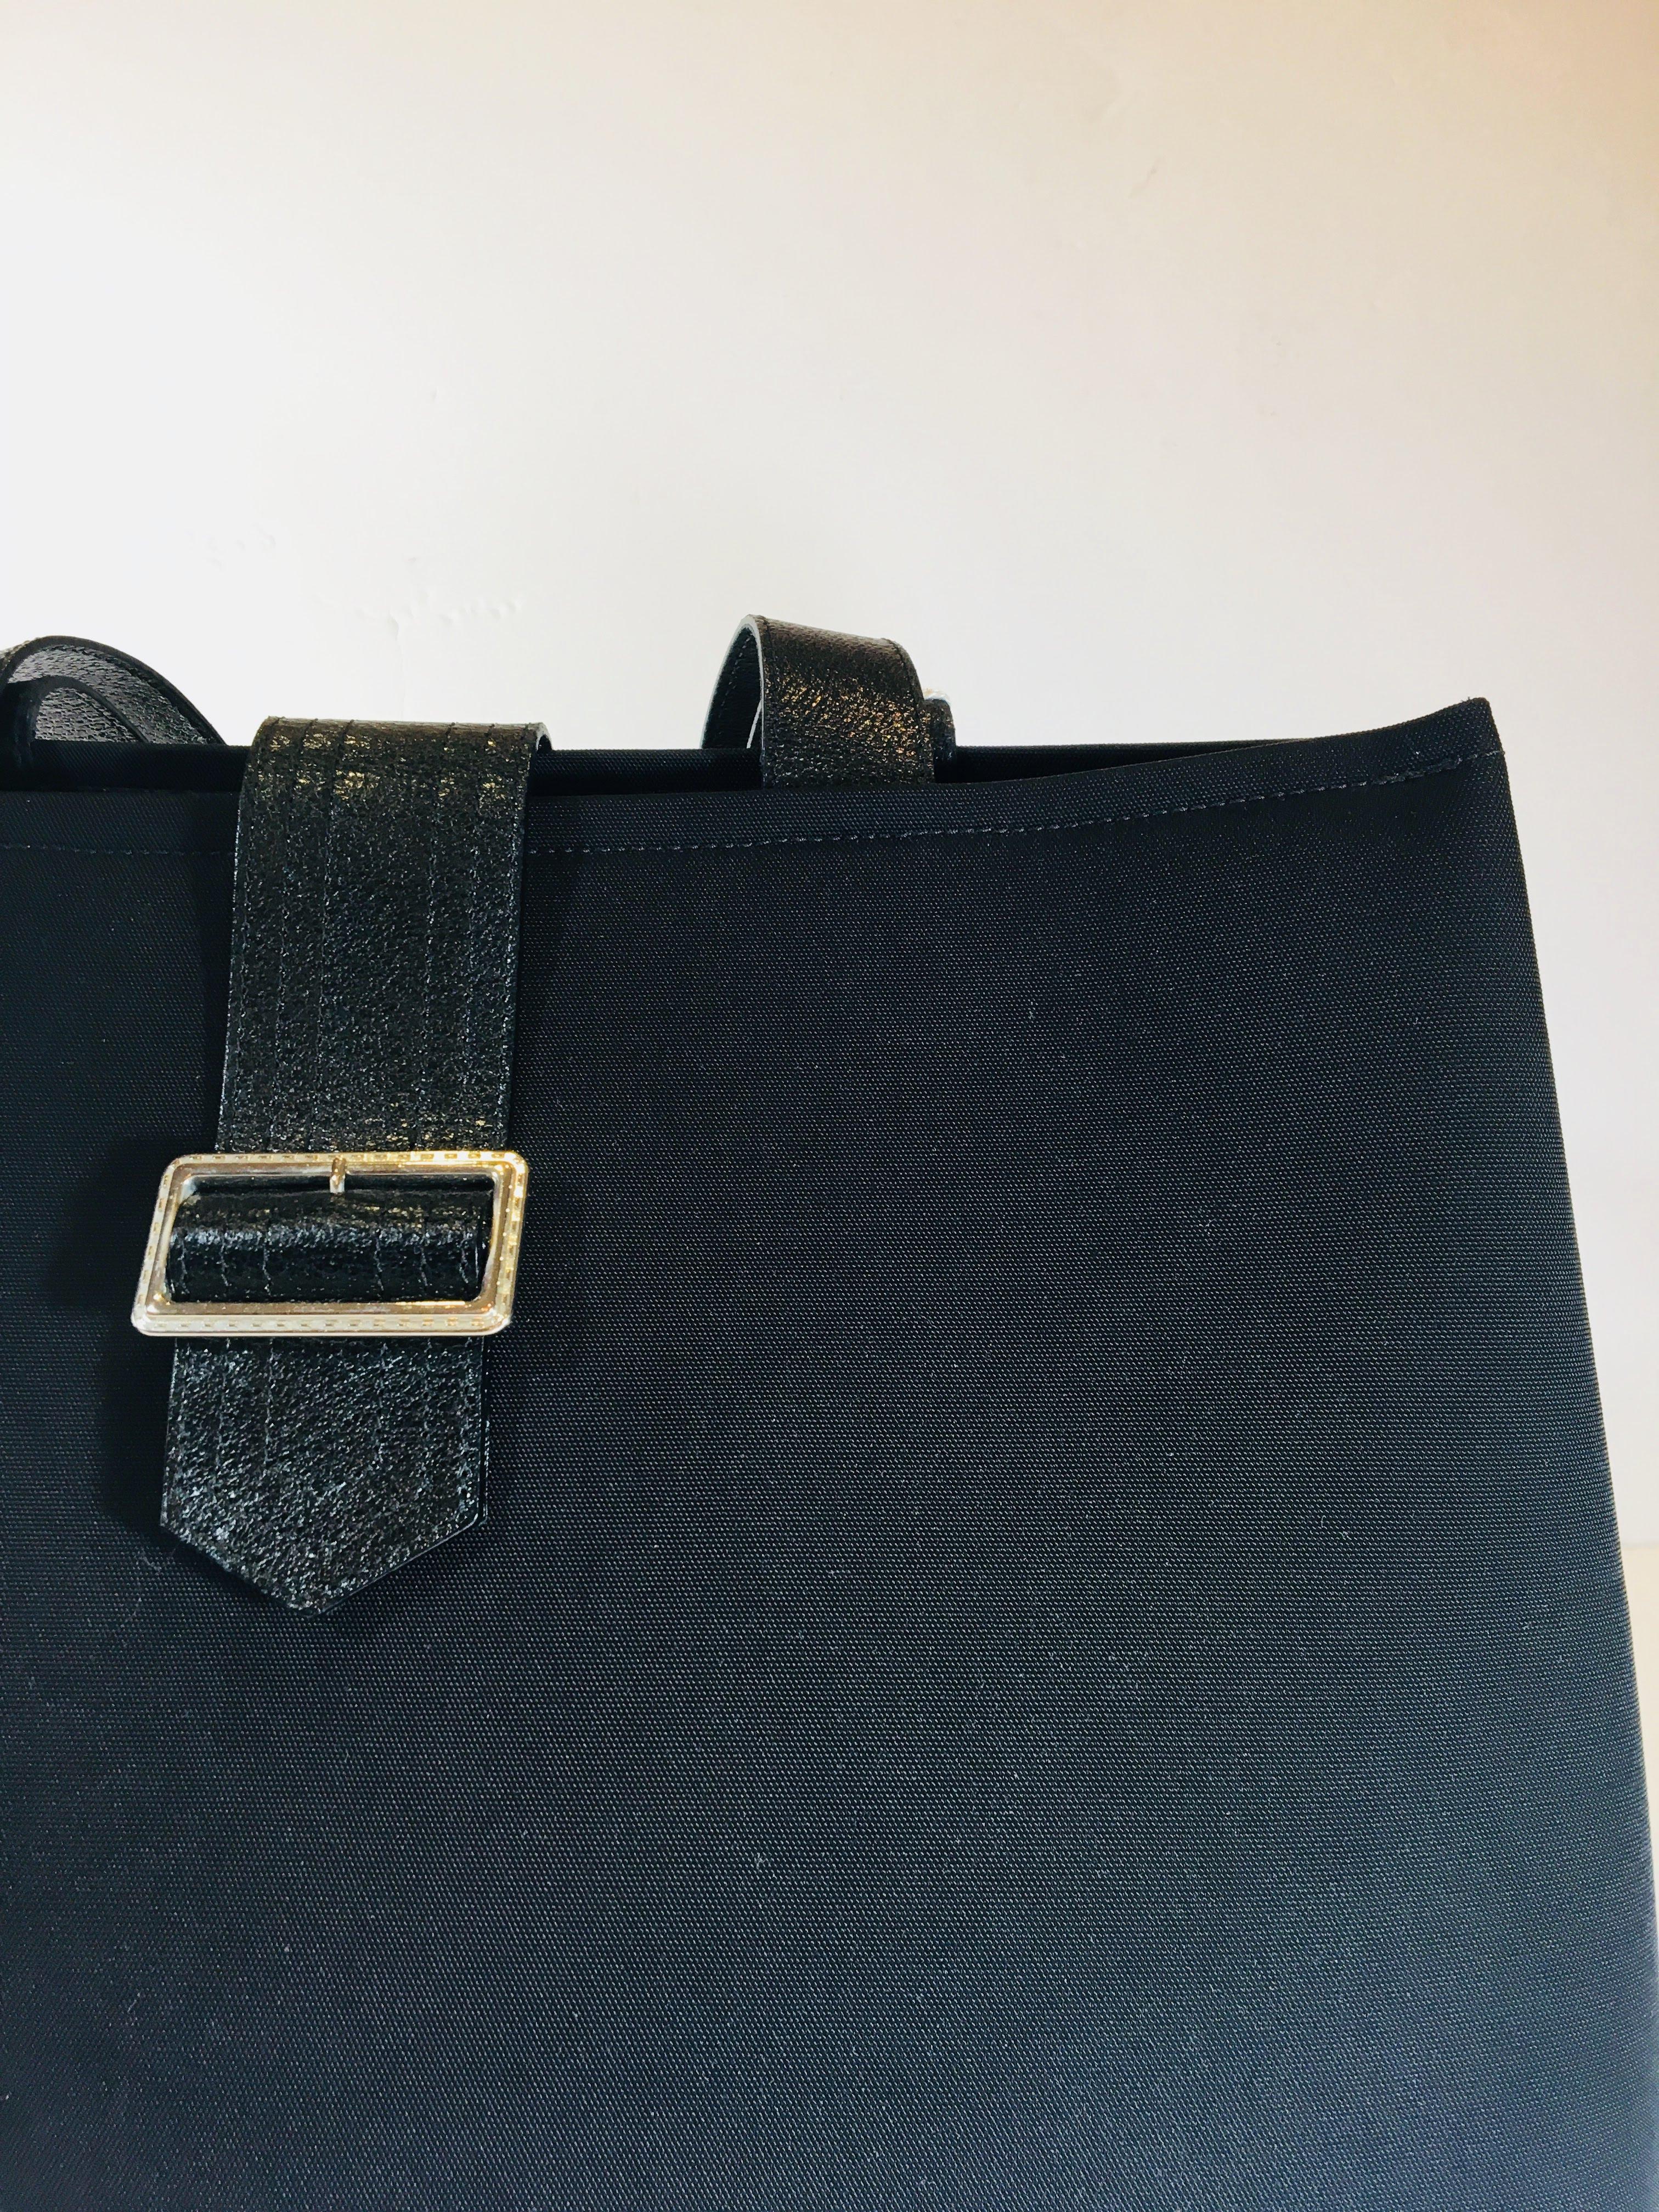 Black Vinyl Tote Bag with Buckle Accent 
18